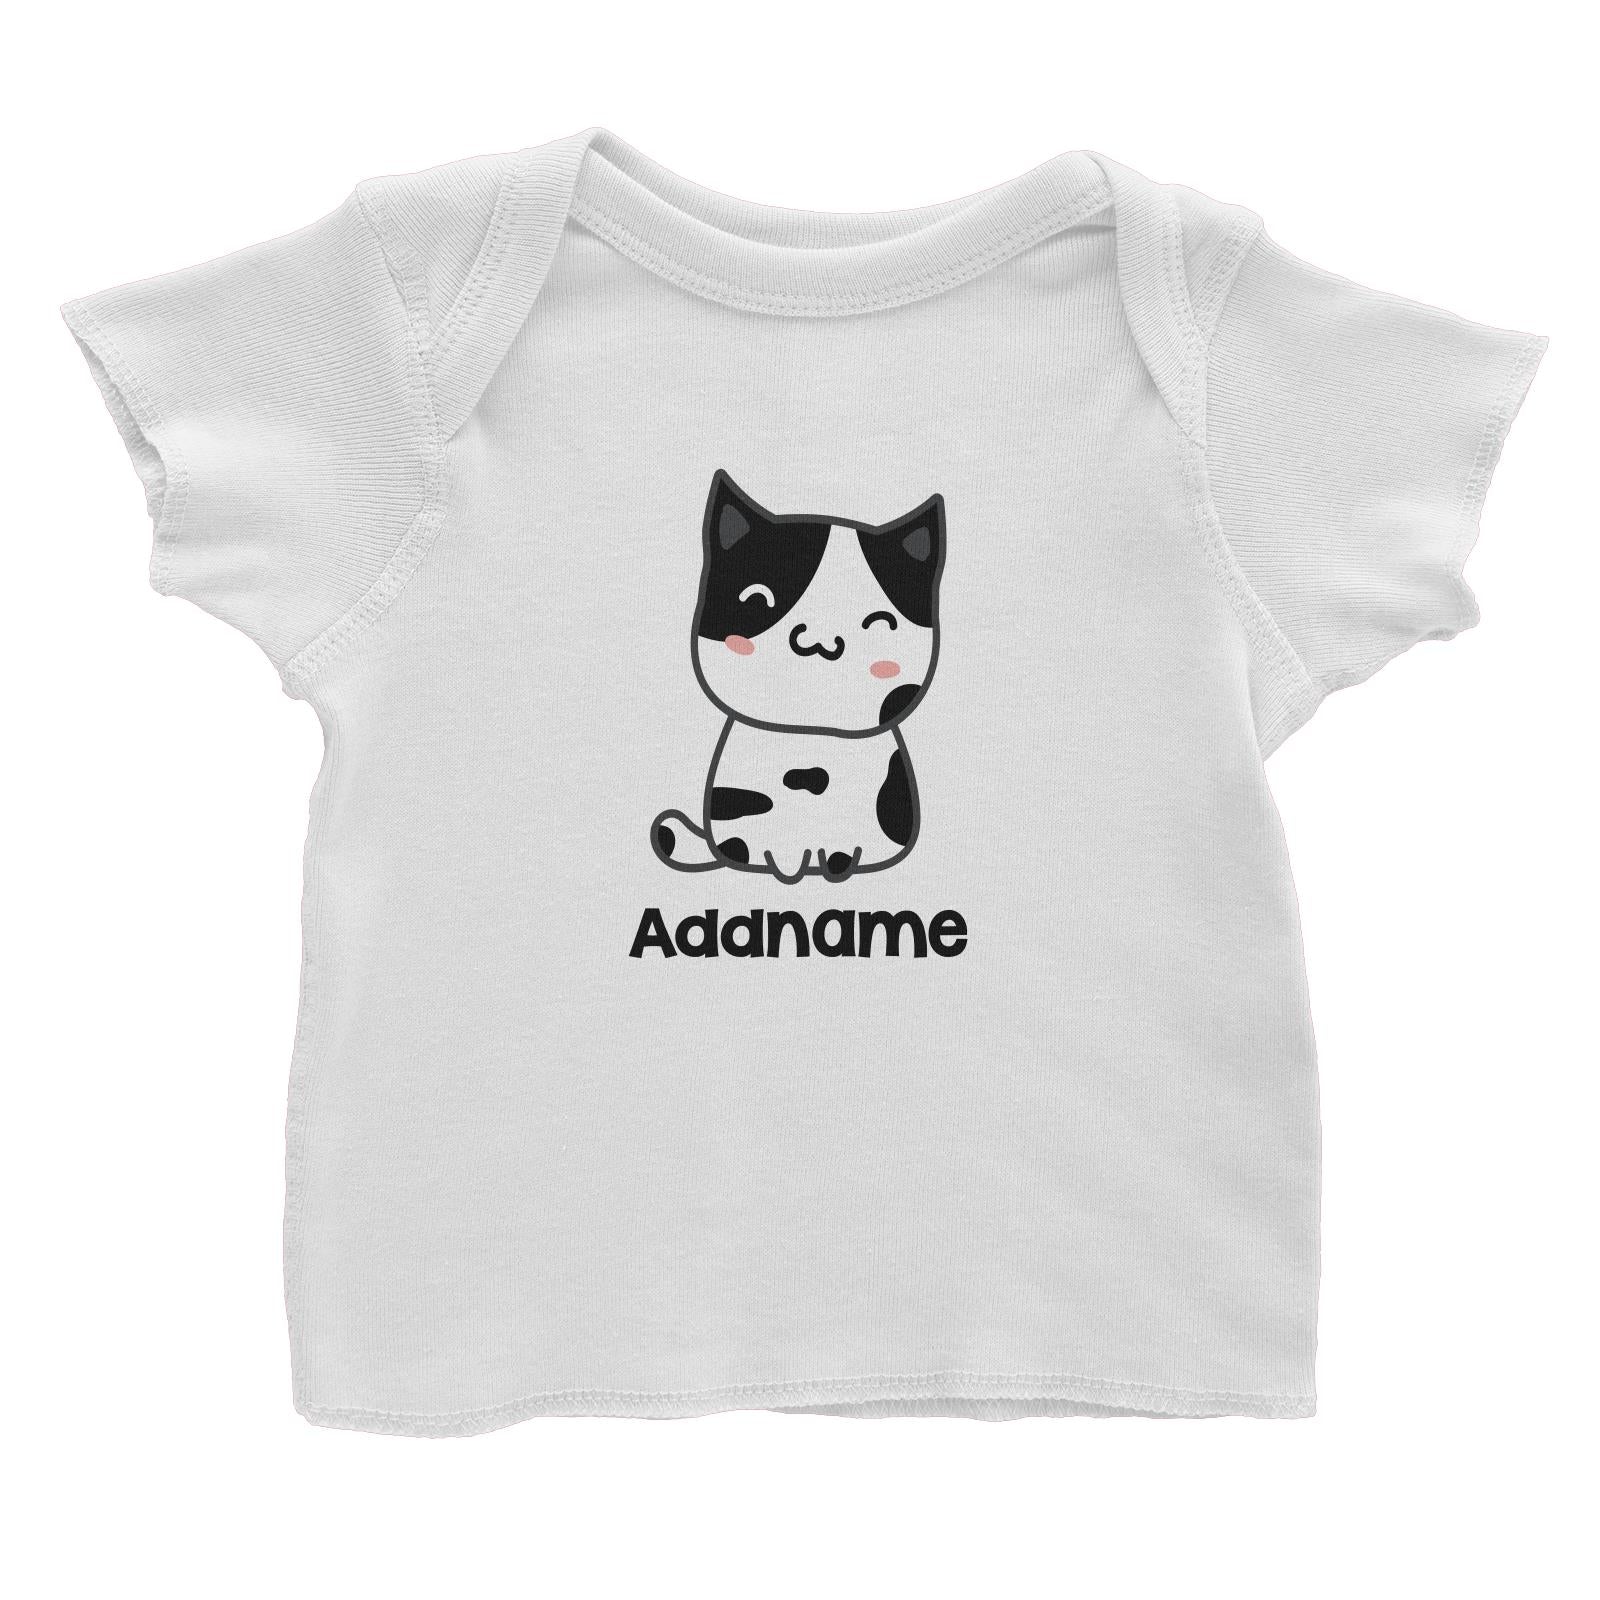 Drawn Adorable Cats Black & White Addname Baby T-Shirt